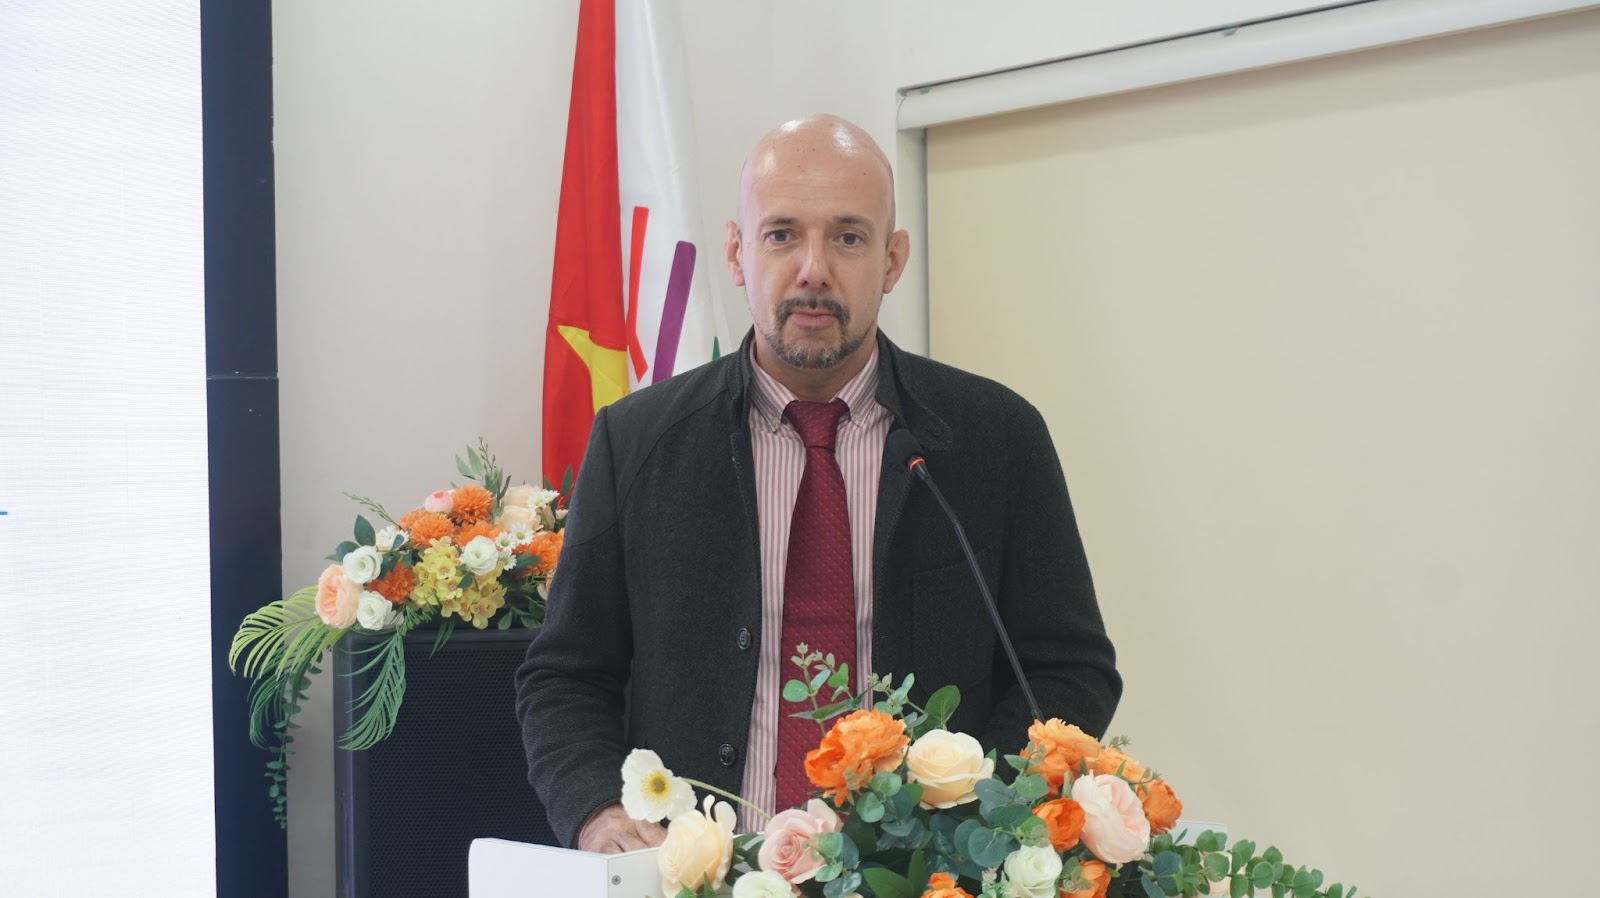 Mr. Arnaud Pannier, Education Cooperation Counselor at the French Embassy in Vietnam